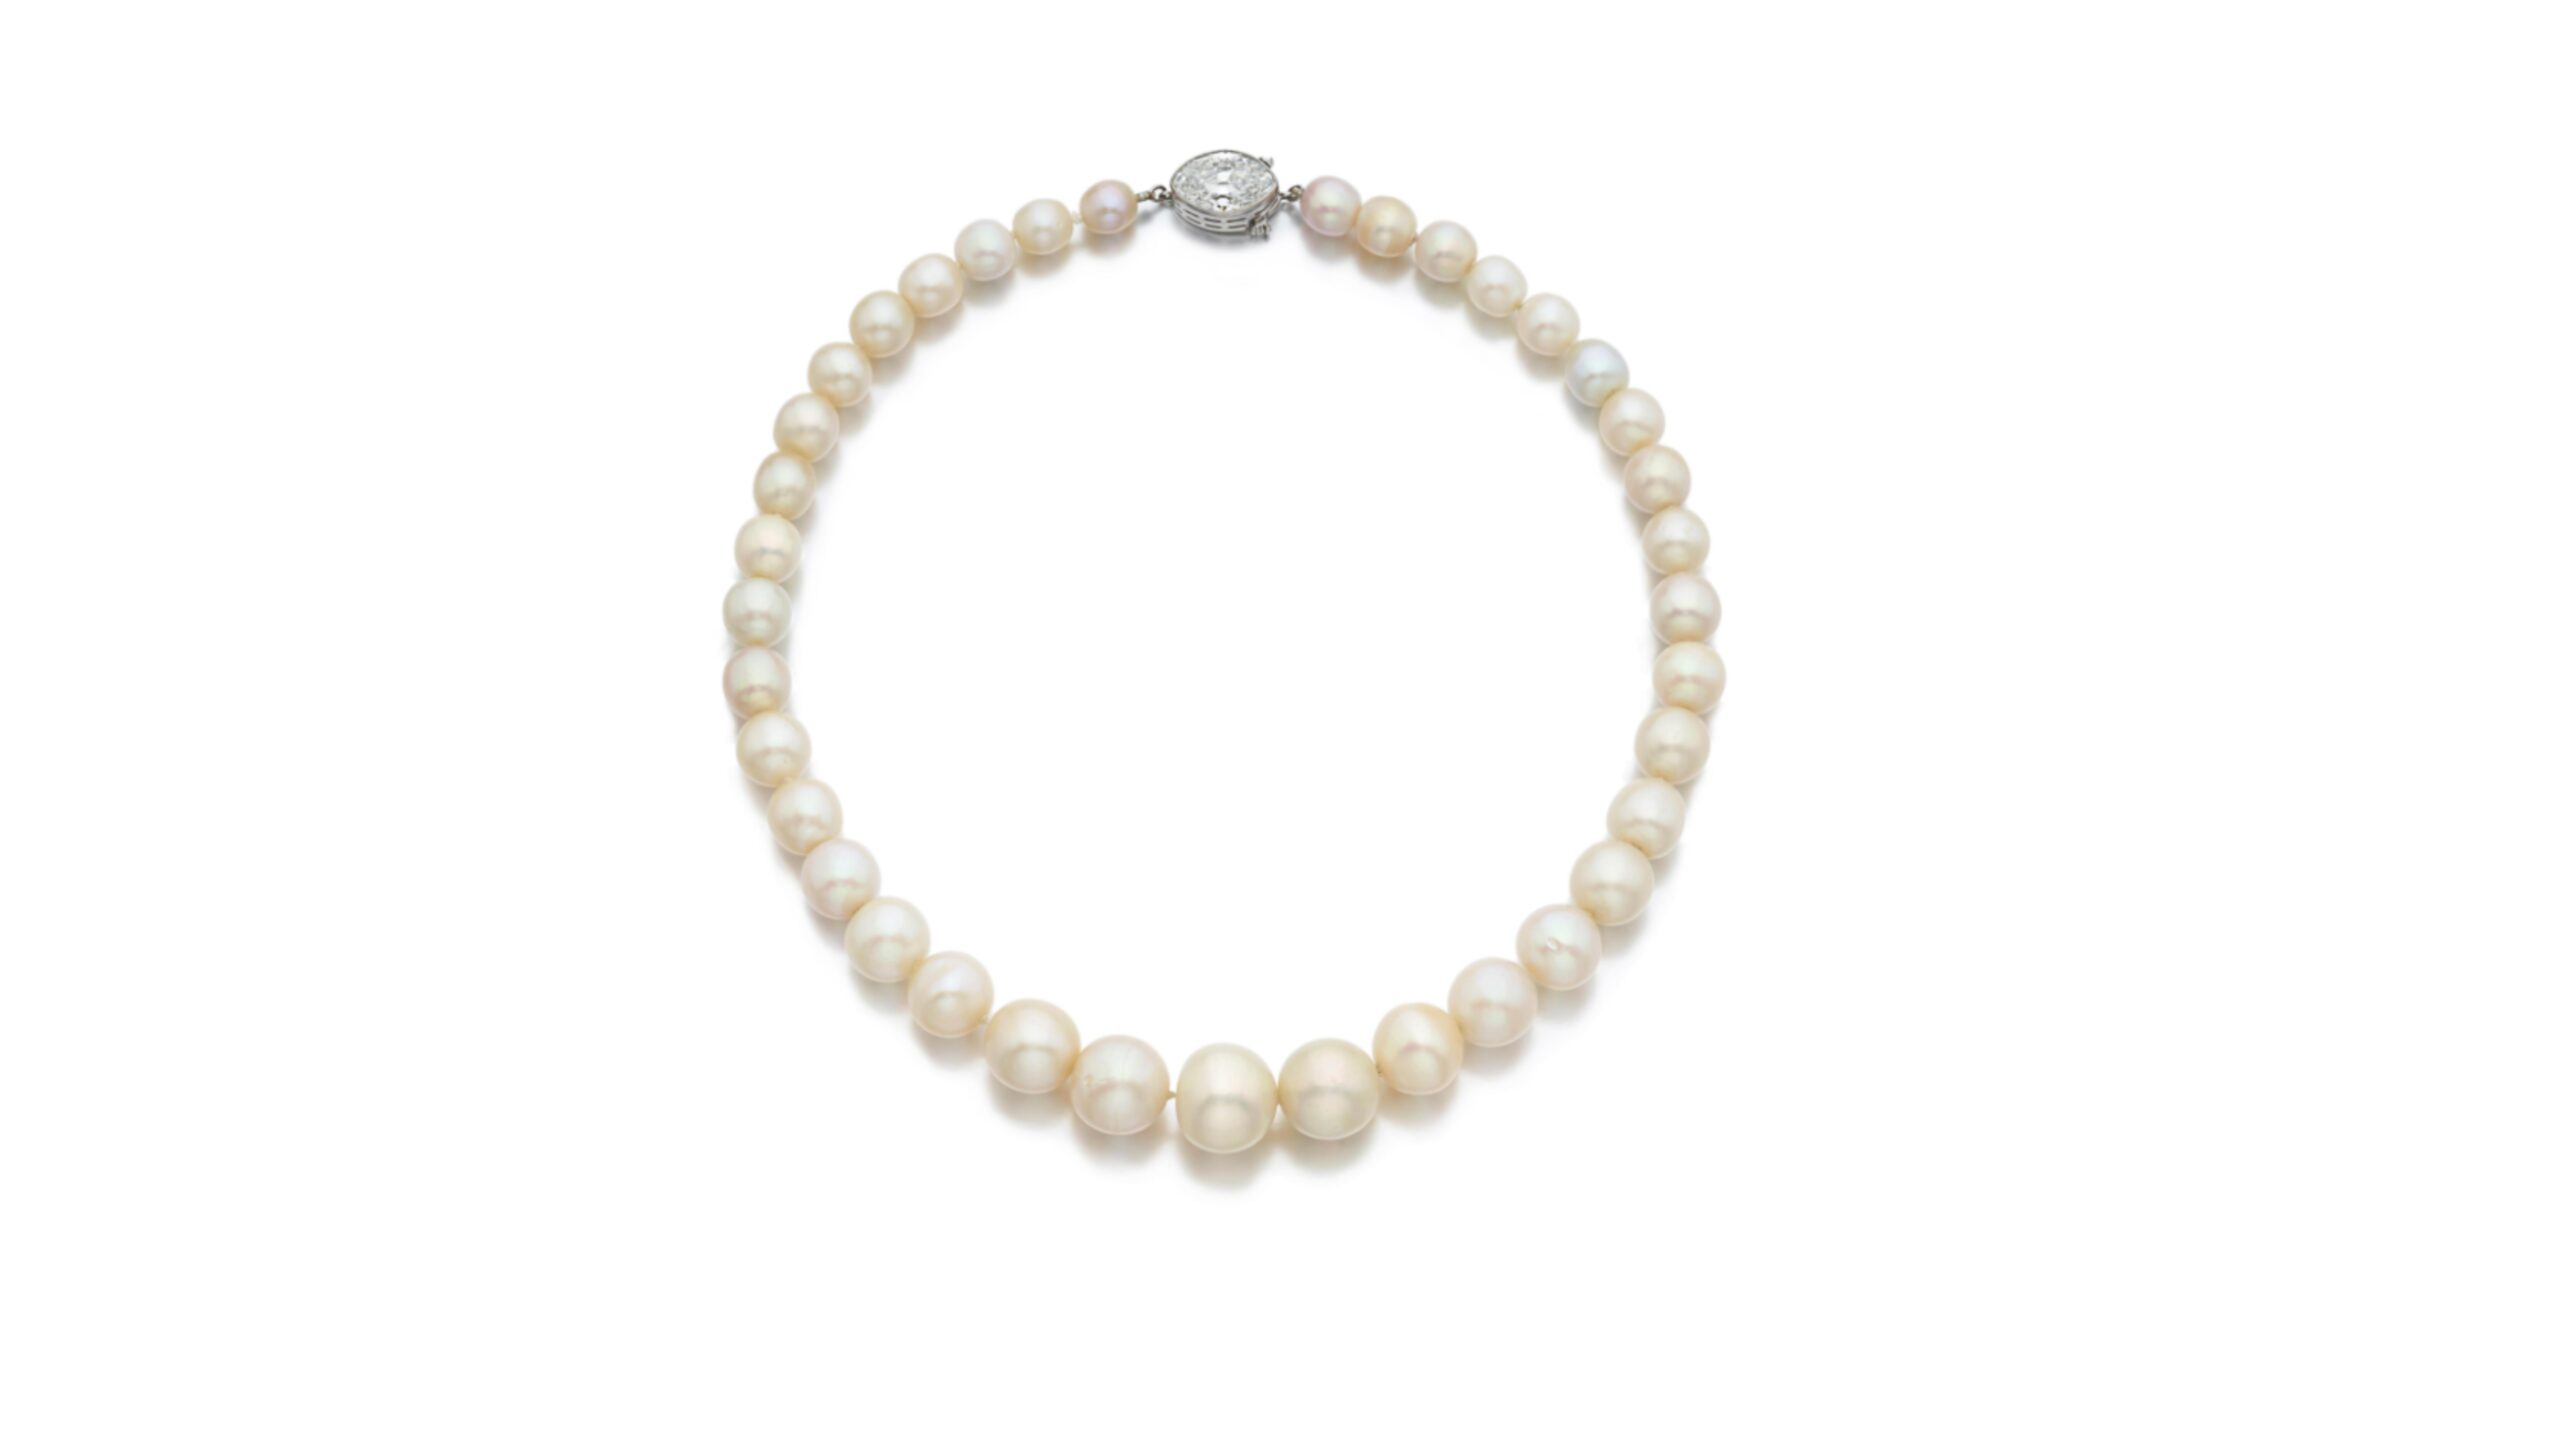 Exceptional natural pearl and diamond necklace, circa 1920